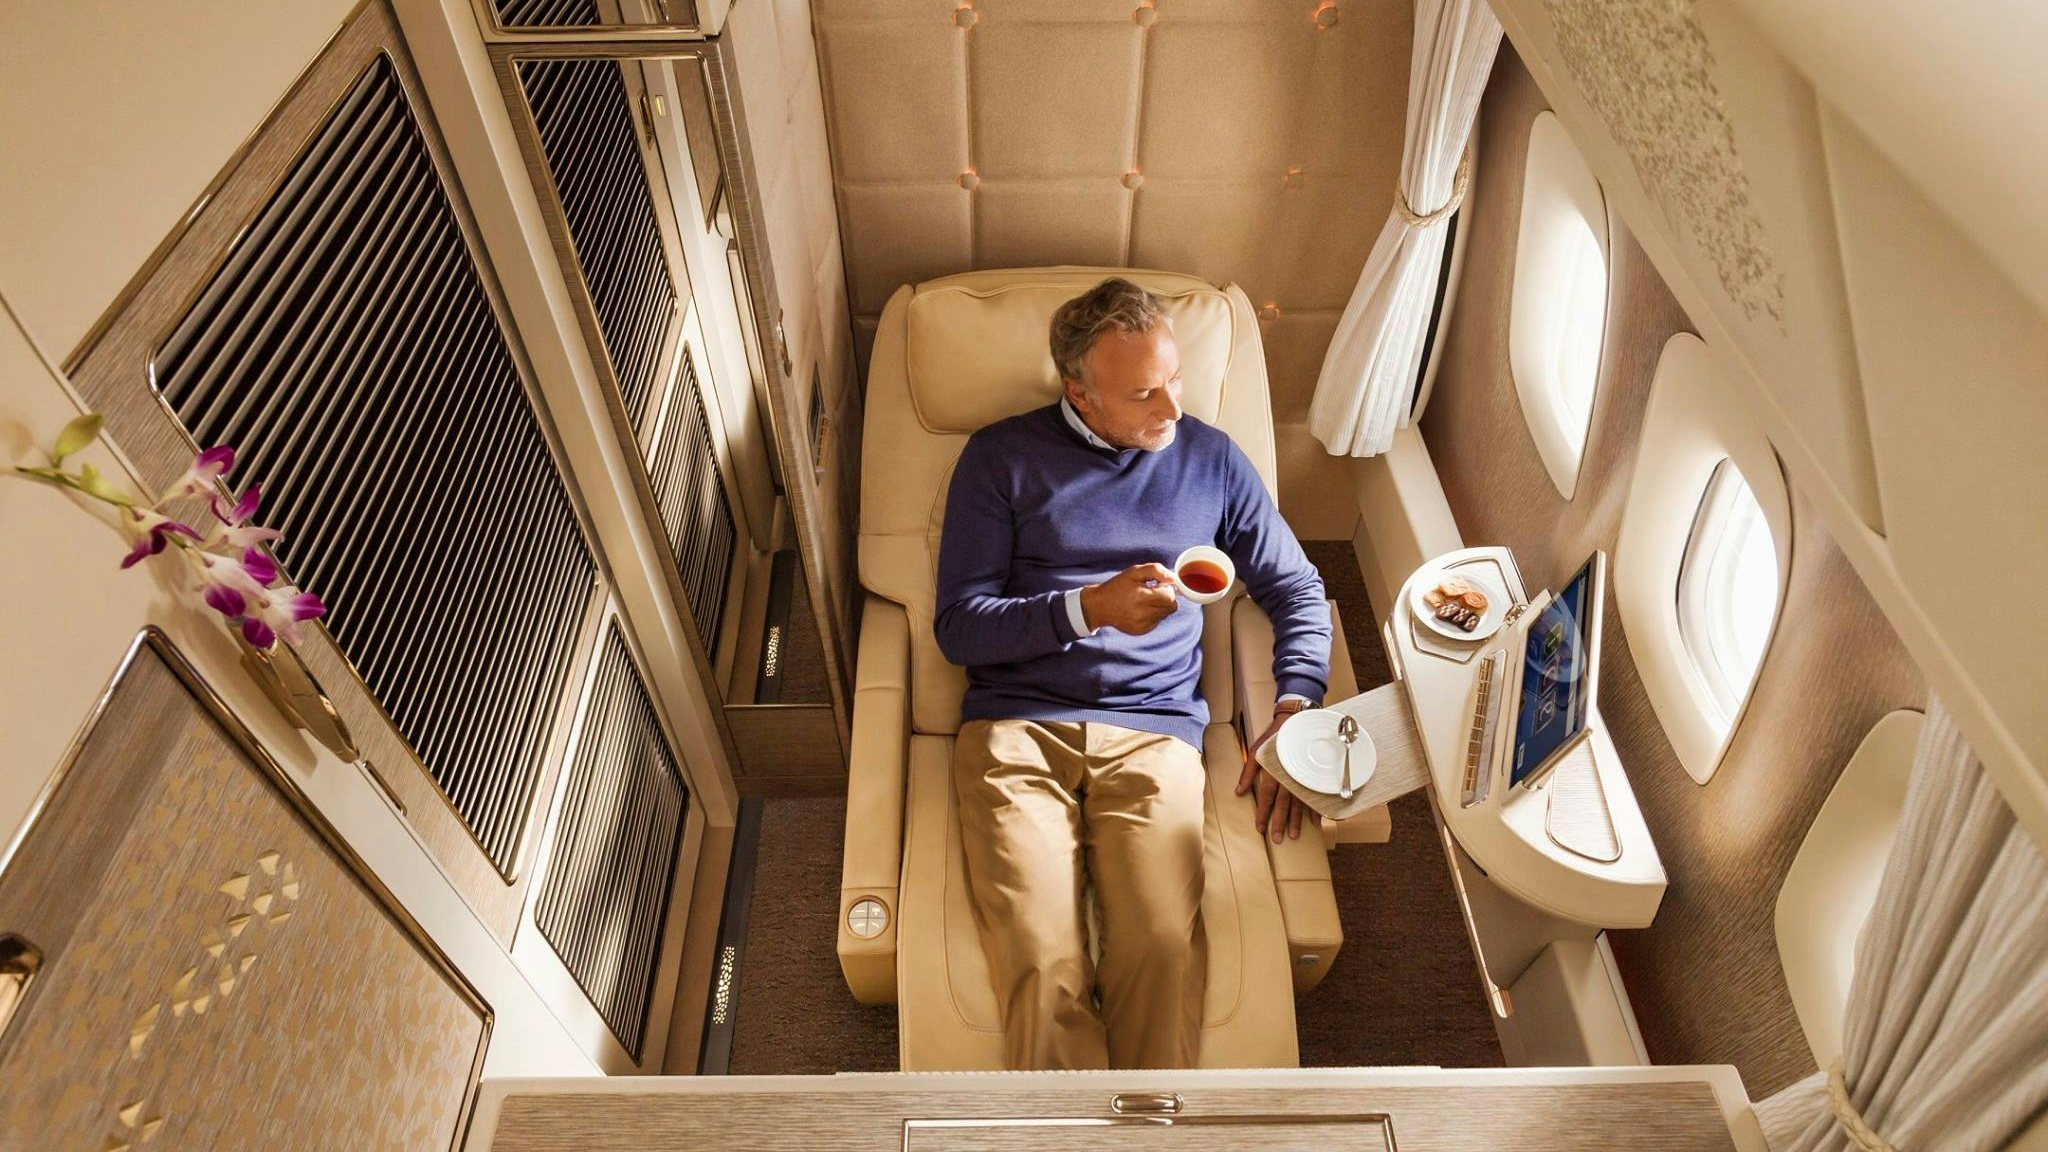 The key to success for luxury brands is to recognize that human connection is the foundation of their business. Photo: Emirates